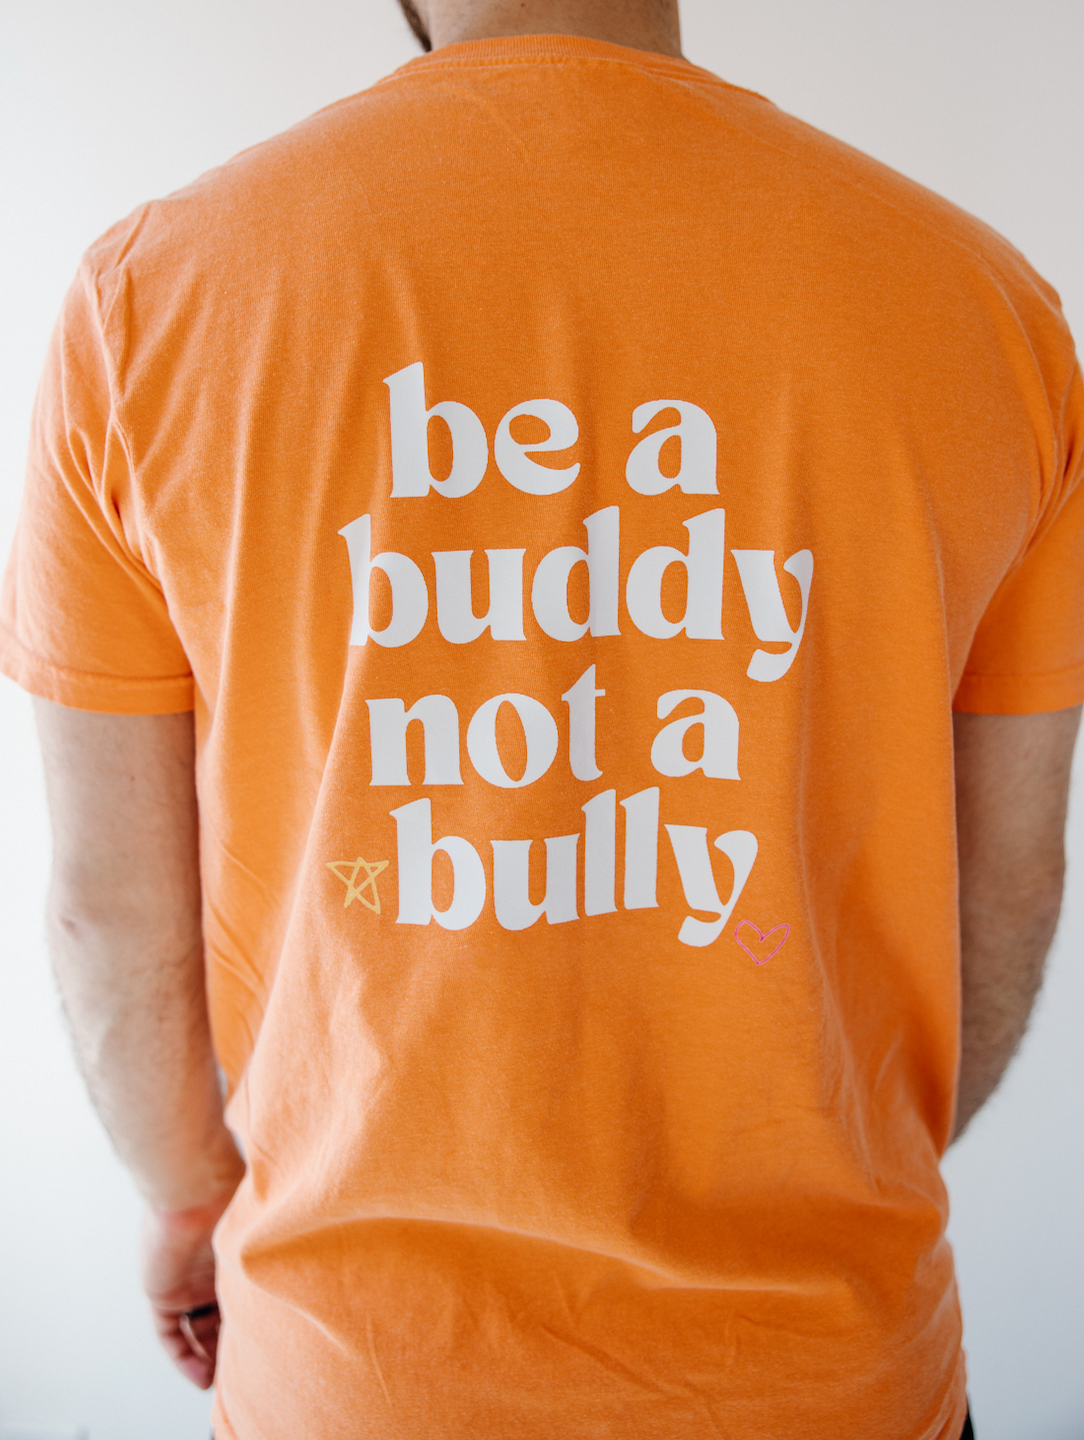 Be a buddy not a bully heavy weight - Adult t-shirt